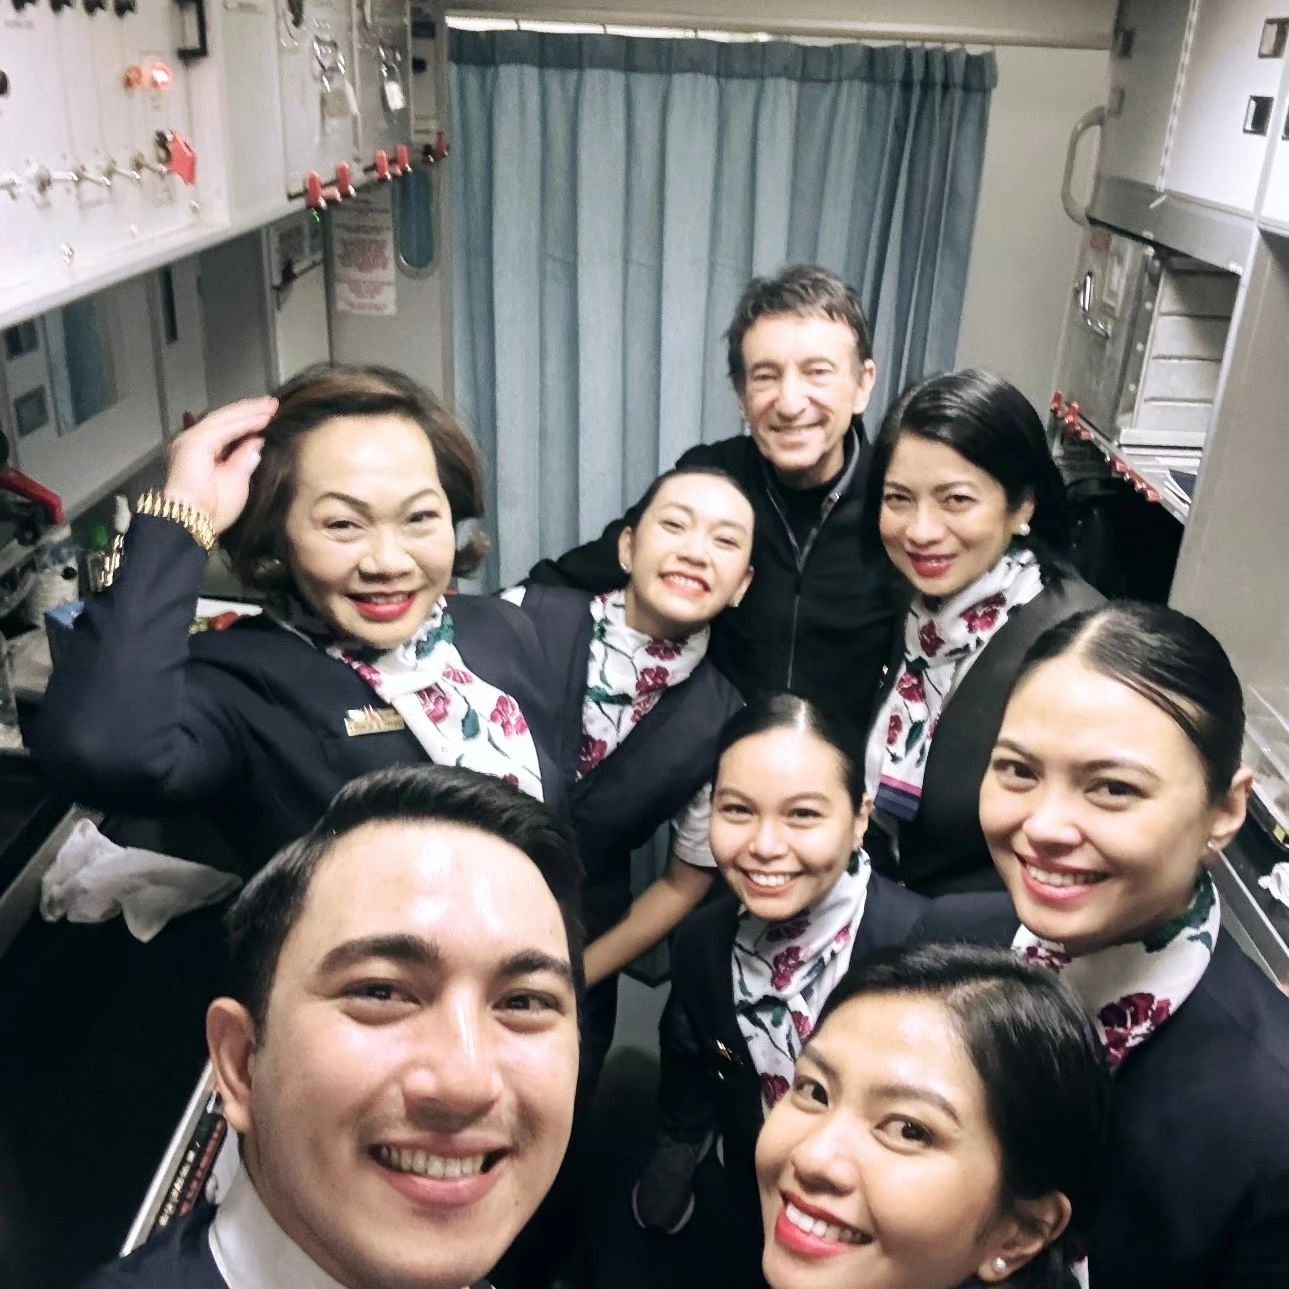 Sharing a moment with the Flight Attendants of Philippines Airlines enroute to Manila. Such awesome people.